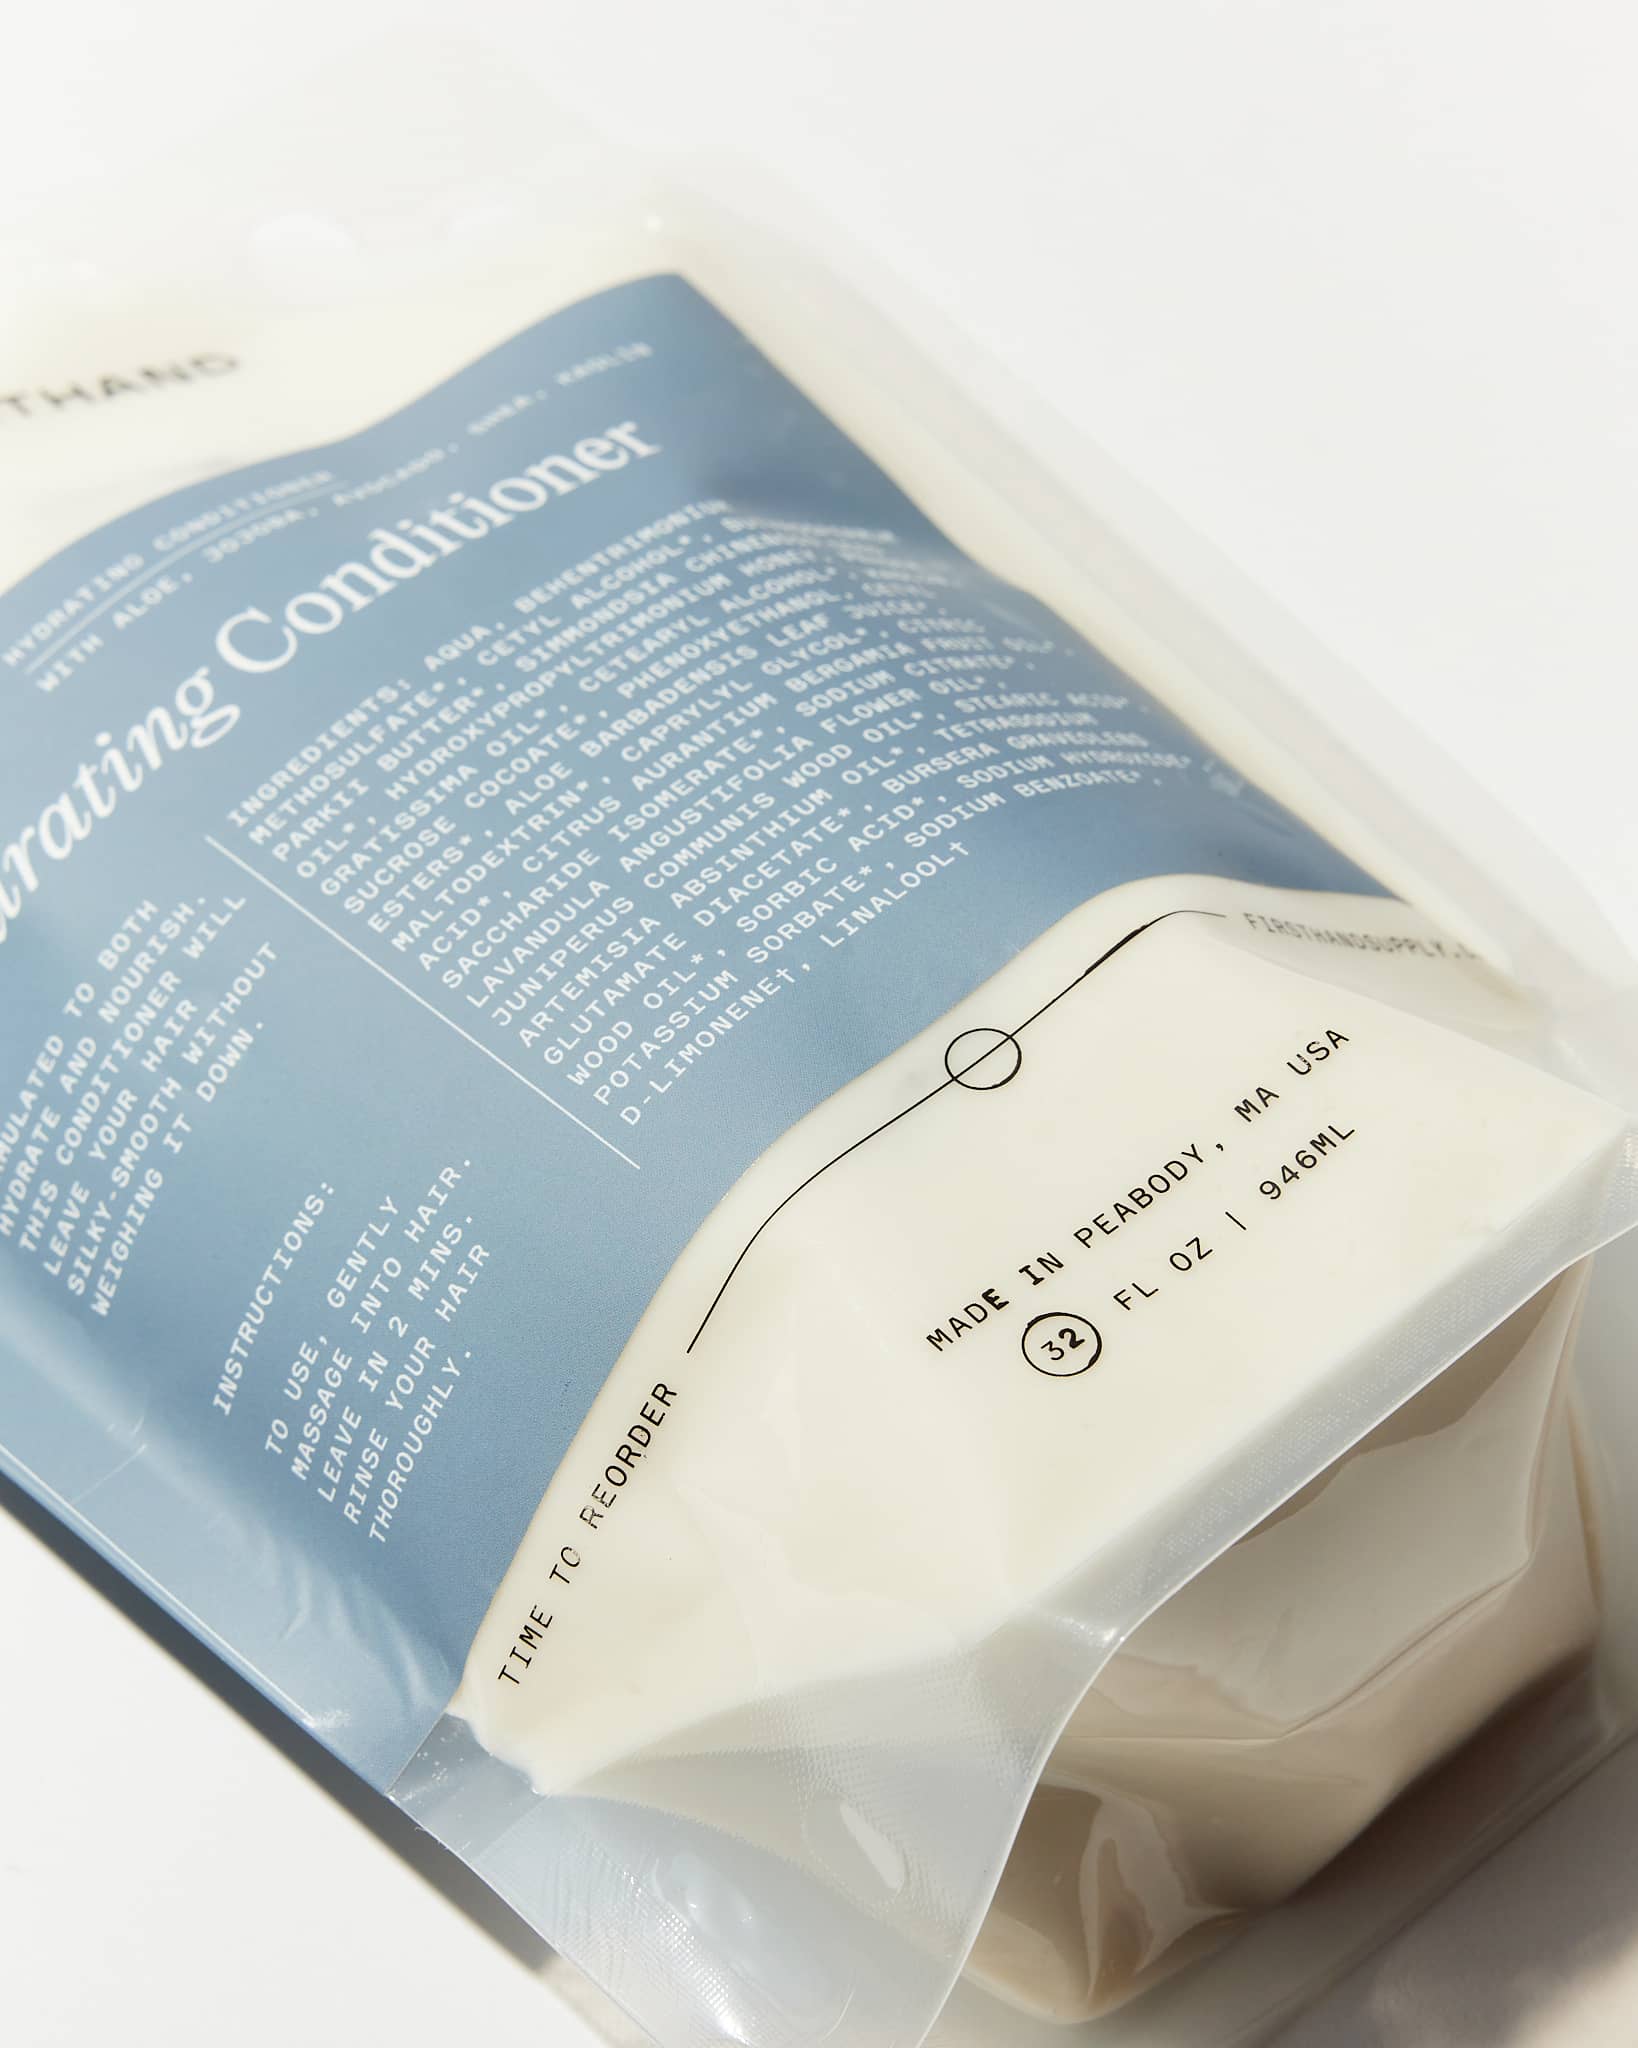 Hydrating Conditioner Refill Pouch (32oz)